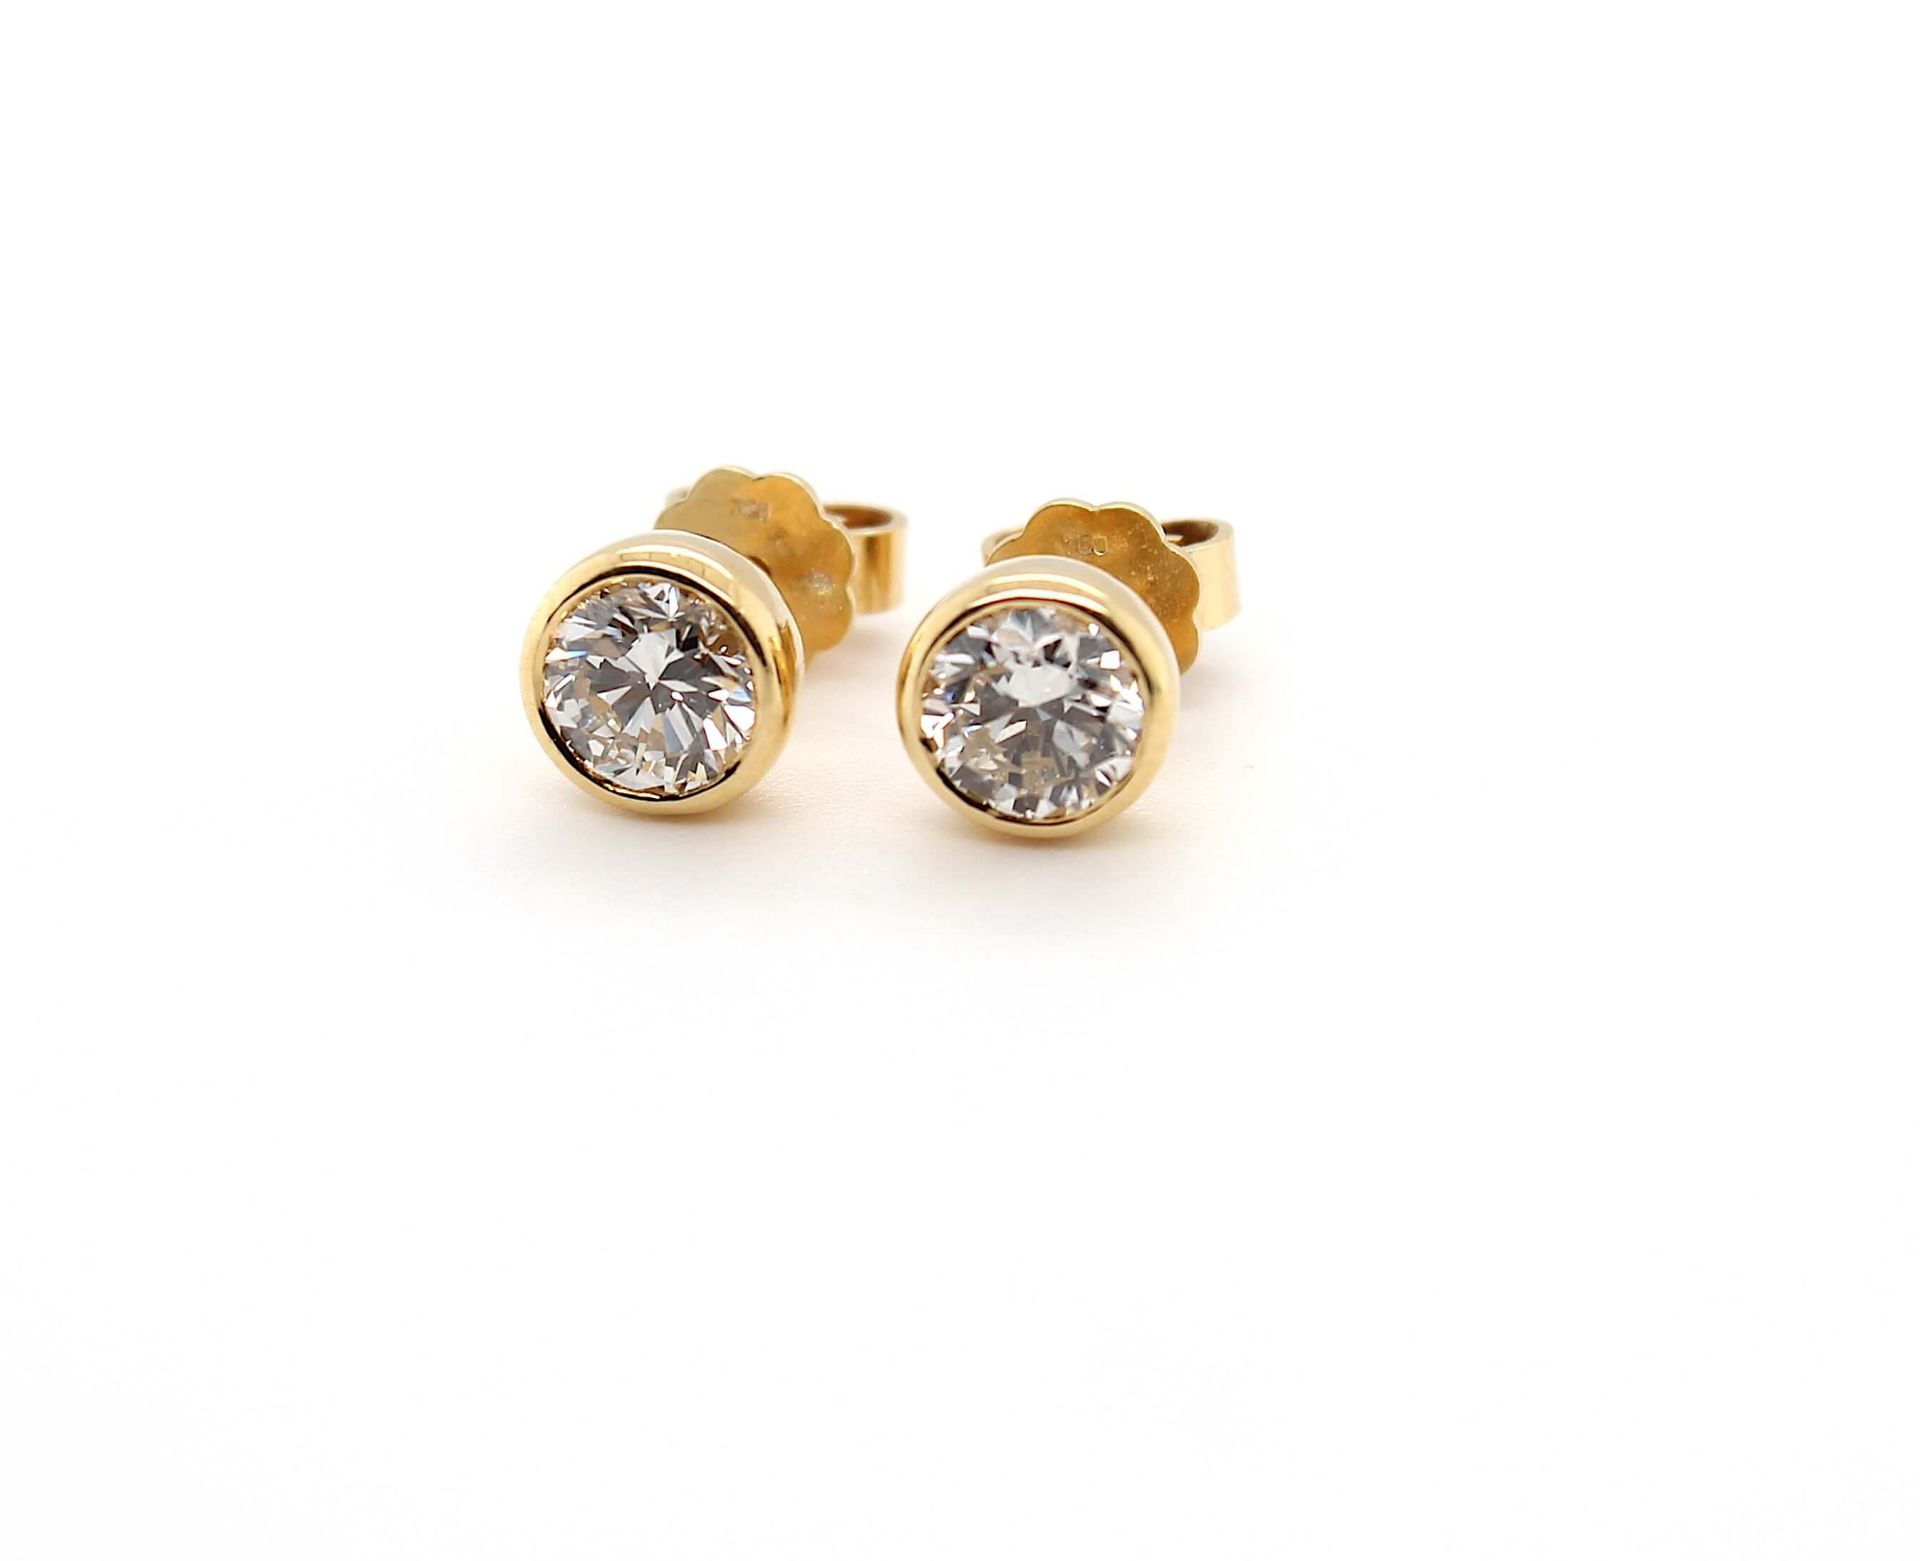 Pair of ear studs with a total of ca. 1.5 ct brilliants - Image 2 of 3